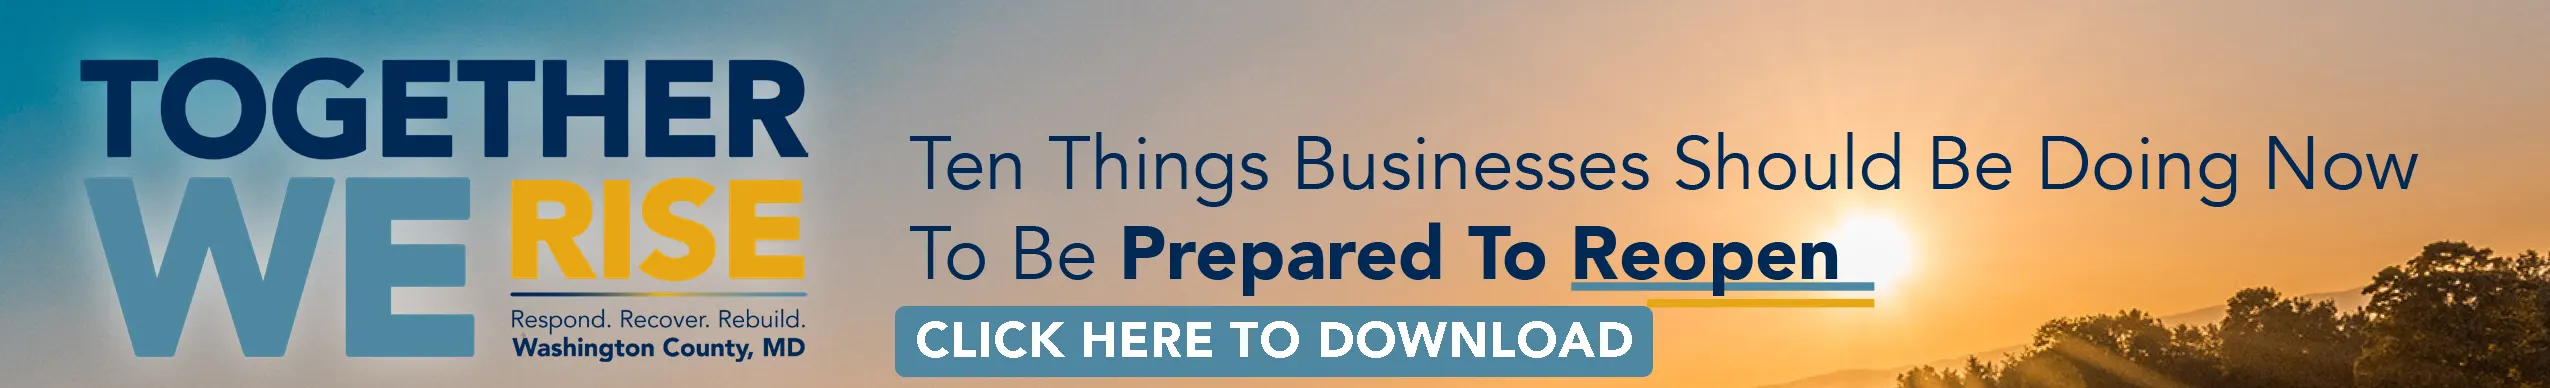 10 things businesses should be doing now to be prepared to reopen